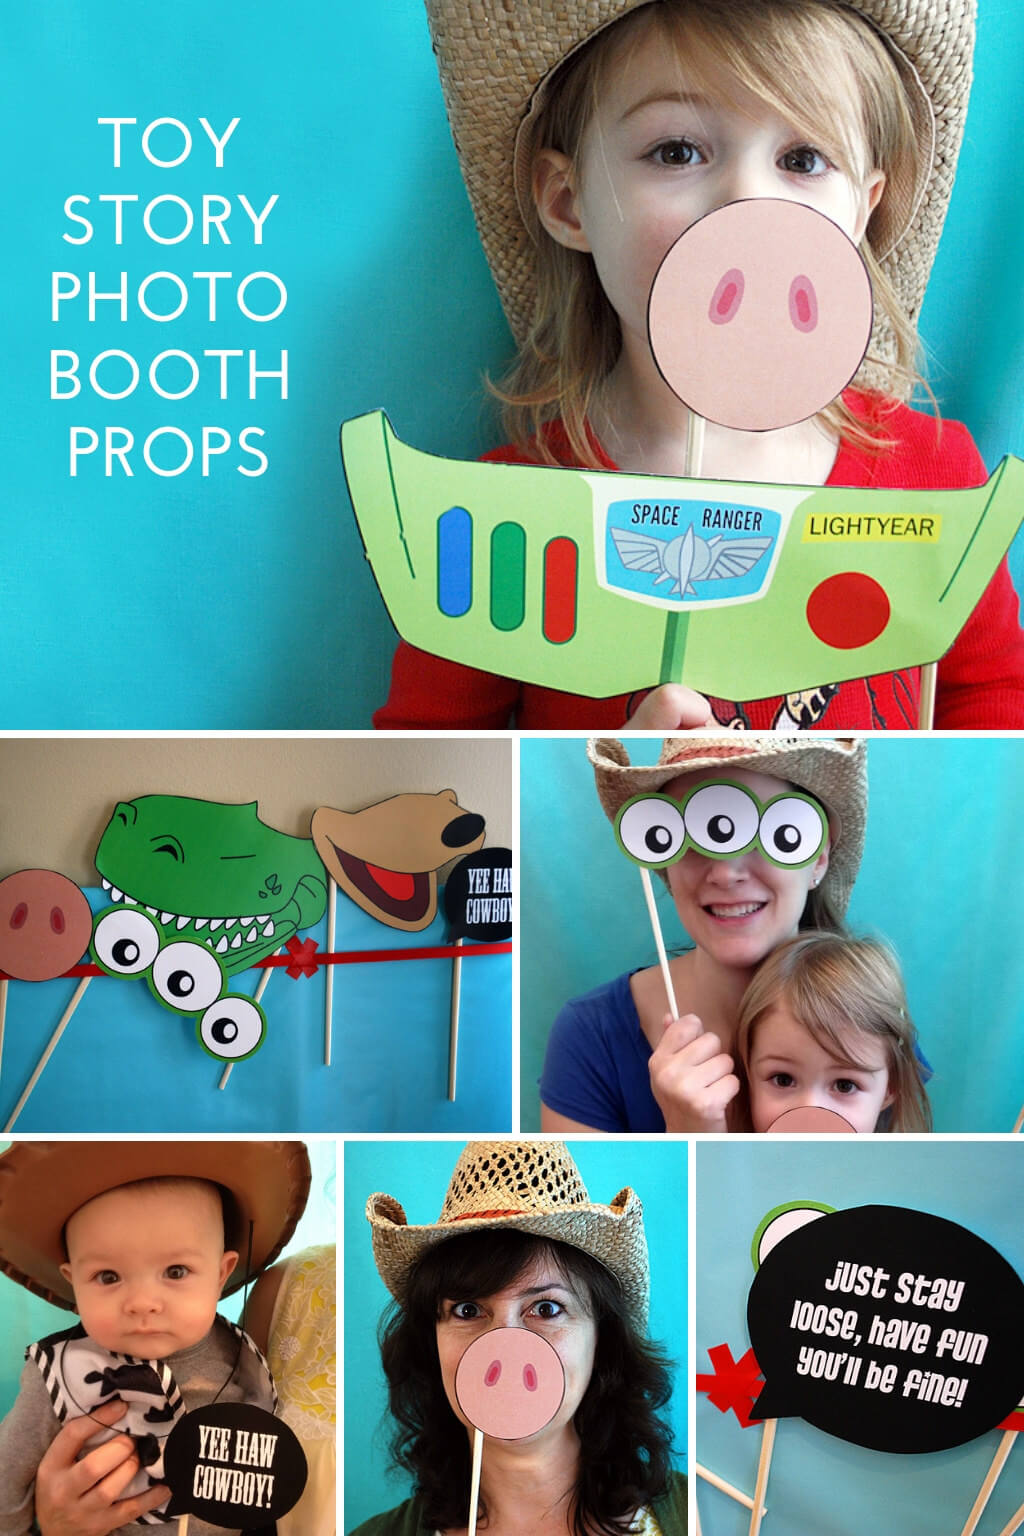 Free Toy Story Photo Booth Props